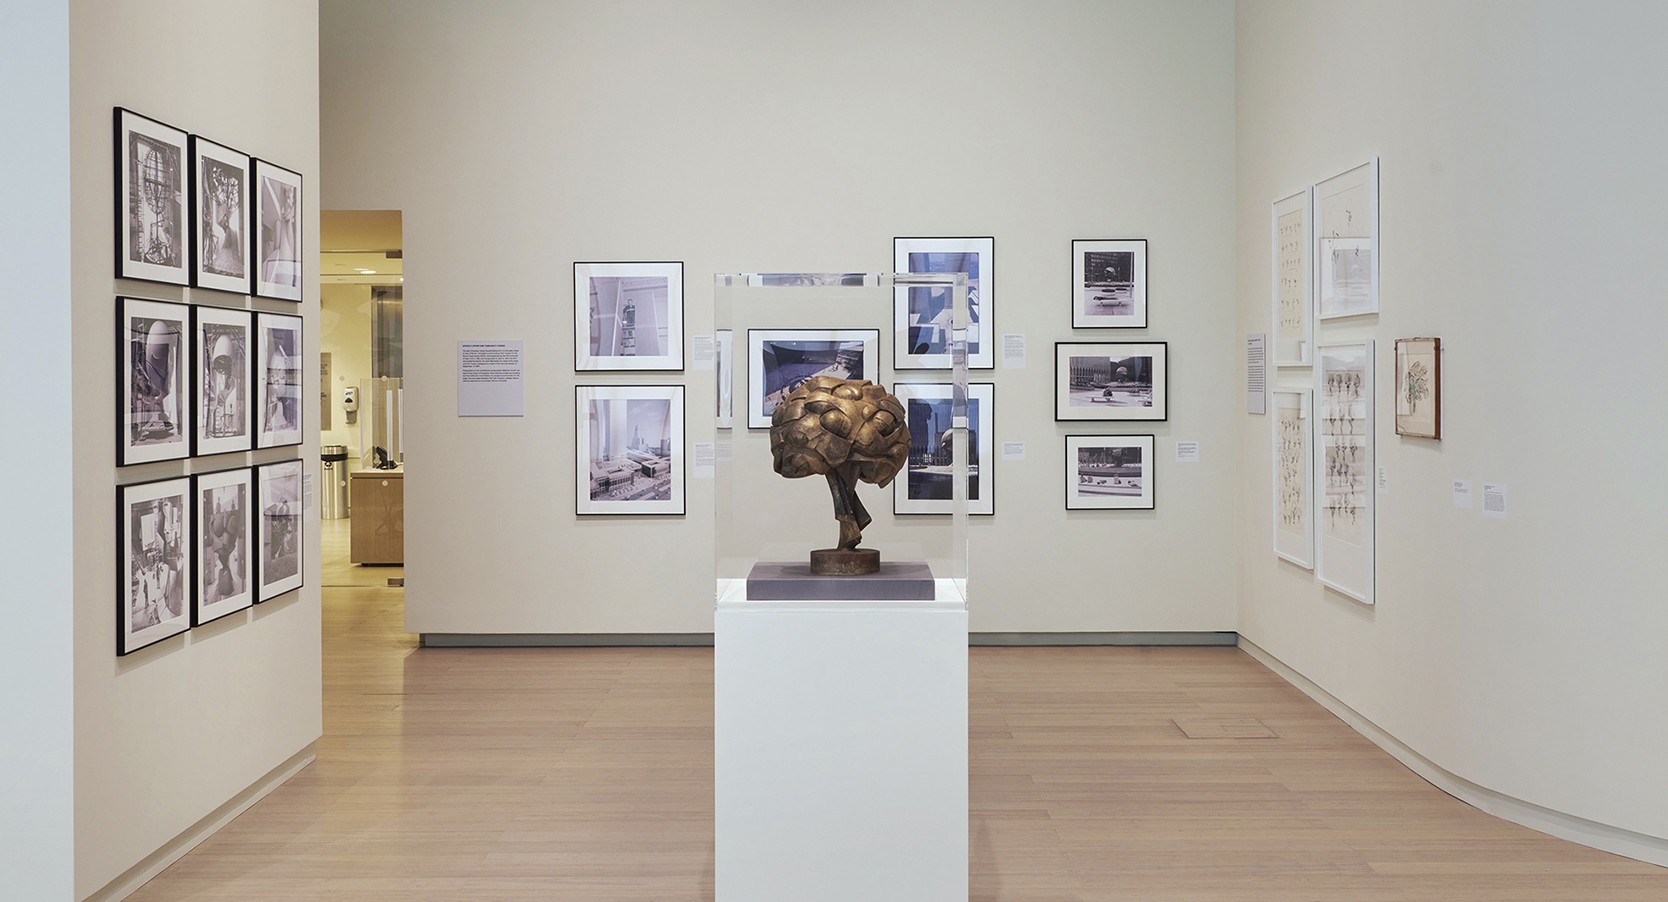 Installation view of the exhibition "The Way We Remember", on view at the Wallach Art Gallery, Columbia University September 10-November 13, 2021. Photograph by Kyle Knodell.